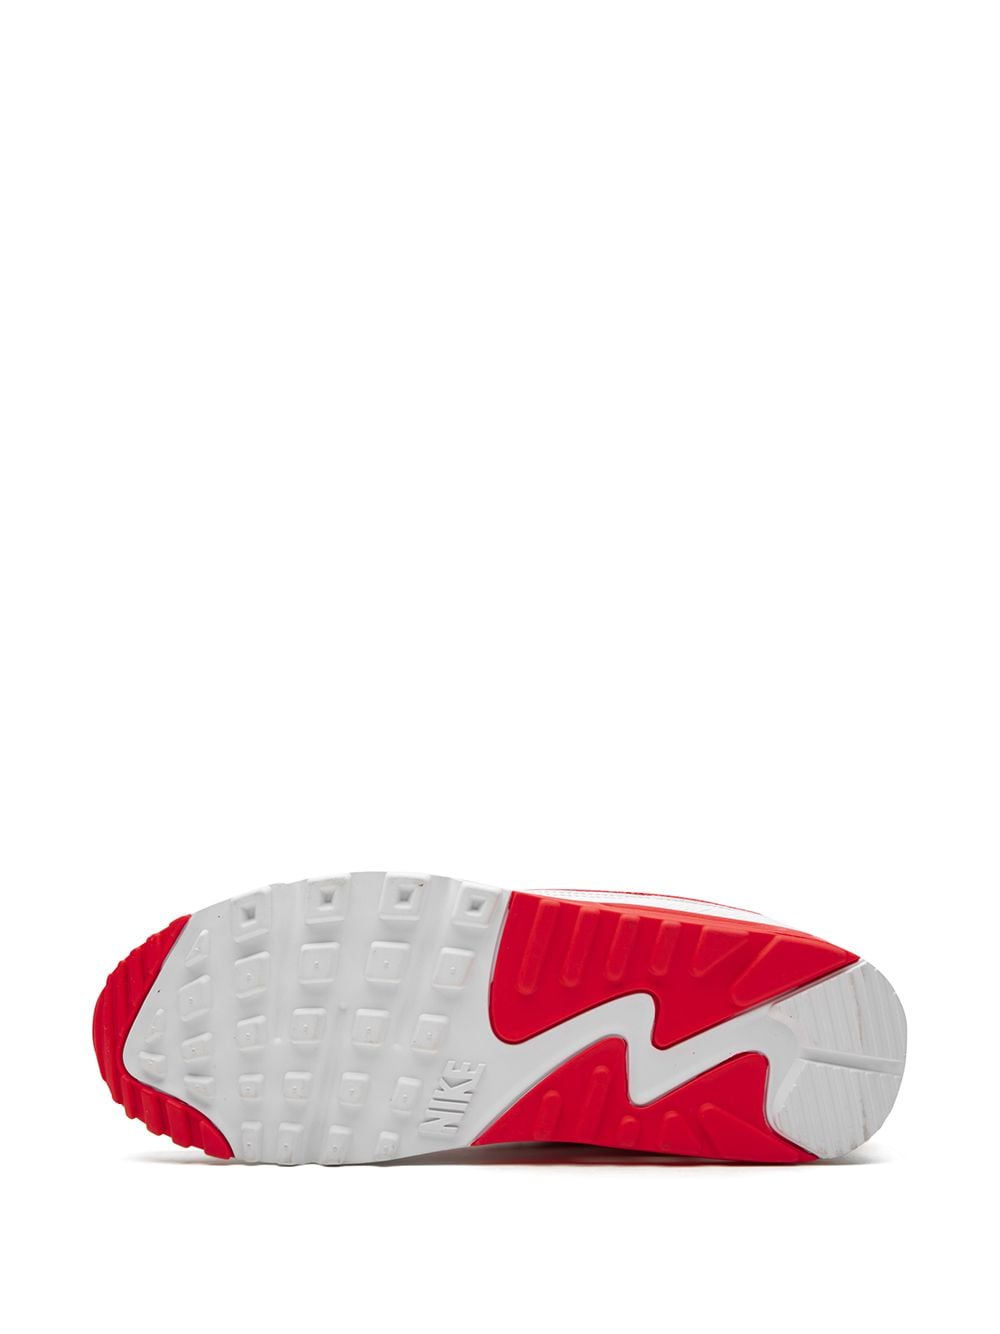 x Undefeated Air Max 90 White/Red sneakers